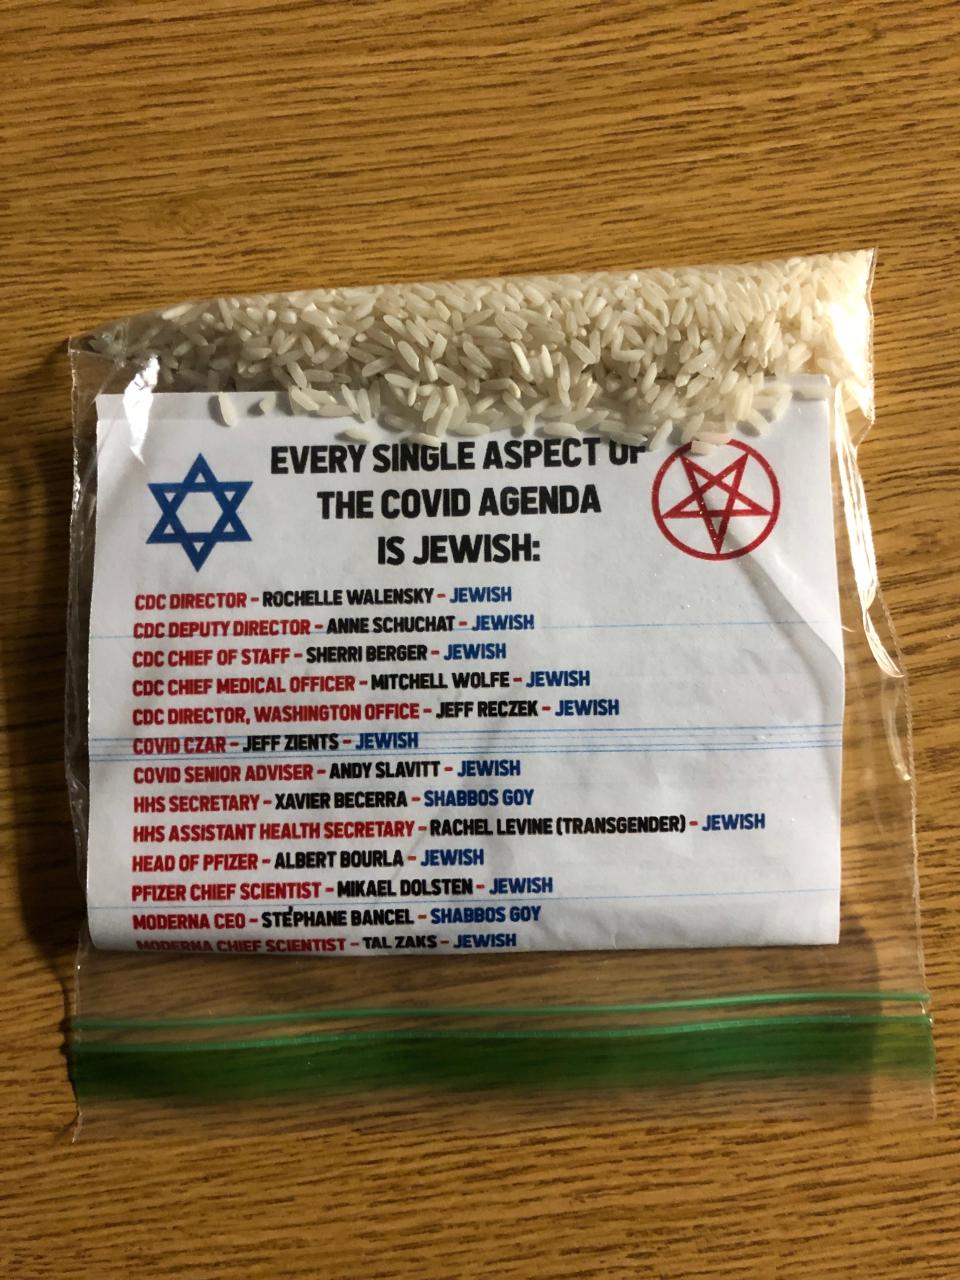 Sarasota residents living in the Arlington Park area found antisemitic flyers distributed throughout their neighborhood on Saturday morning.